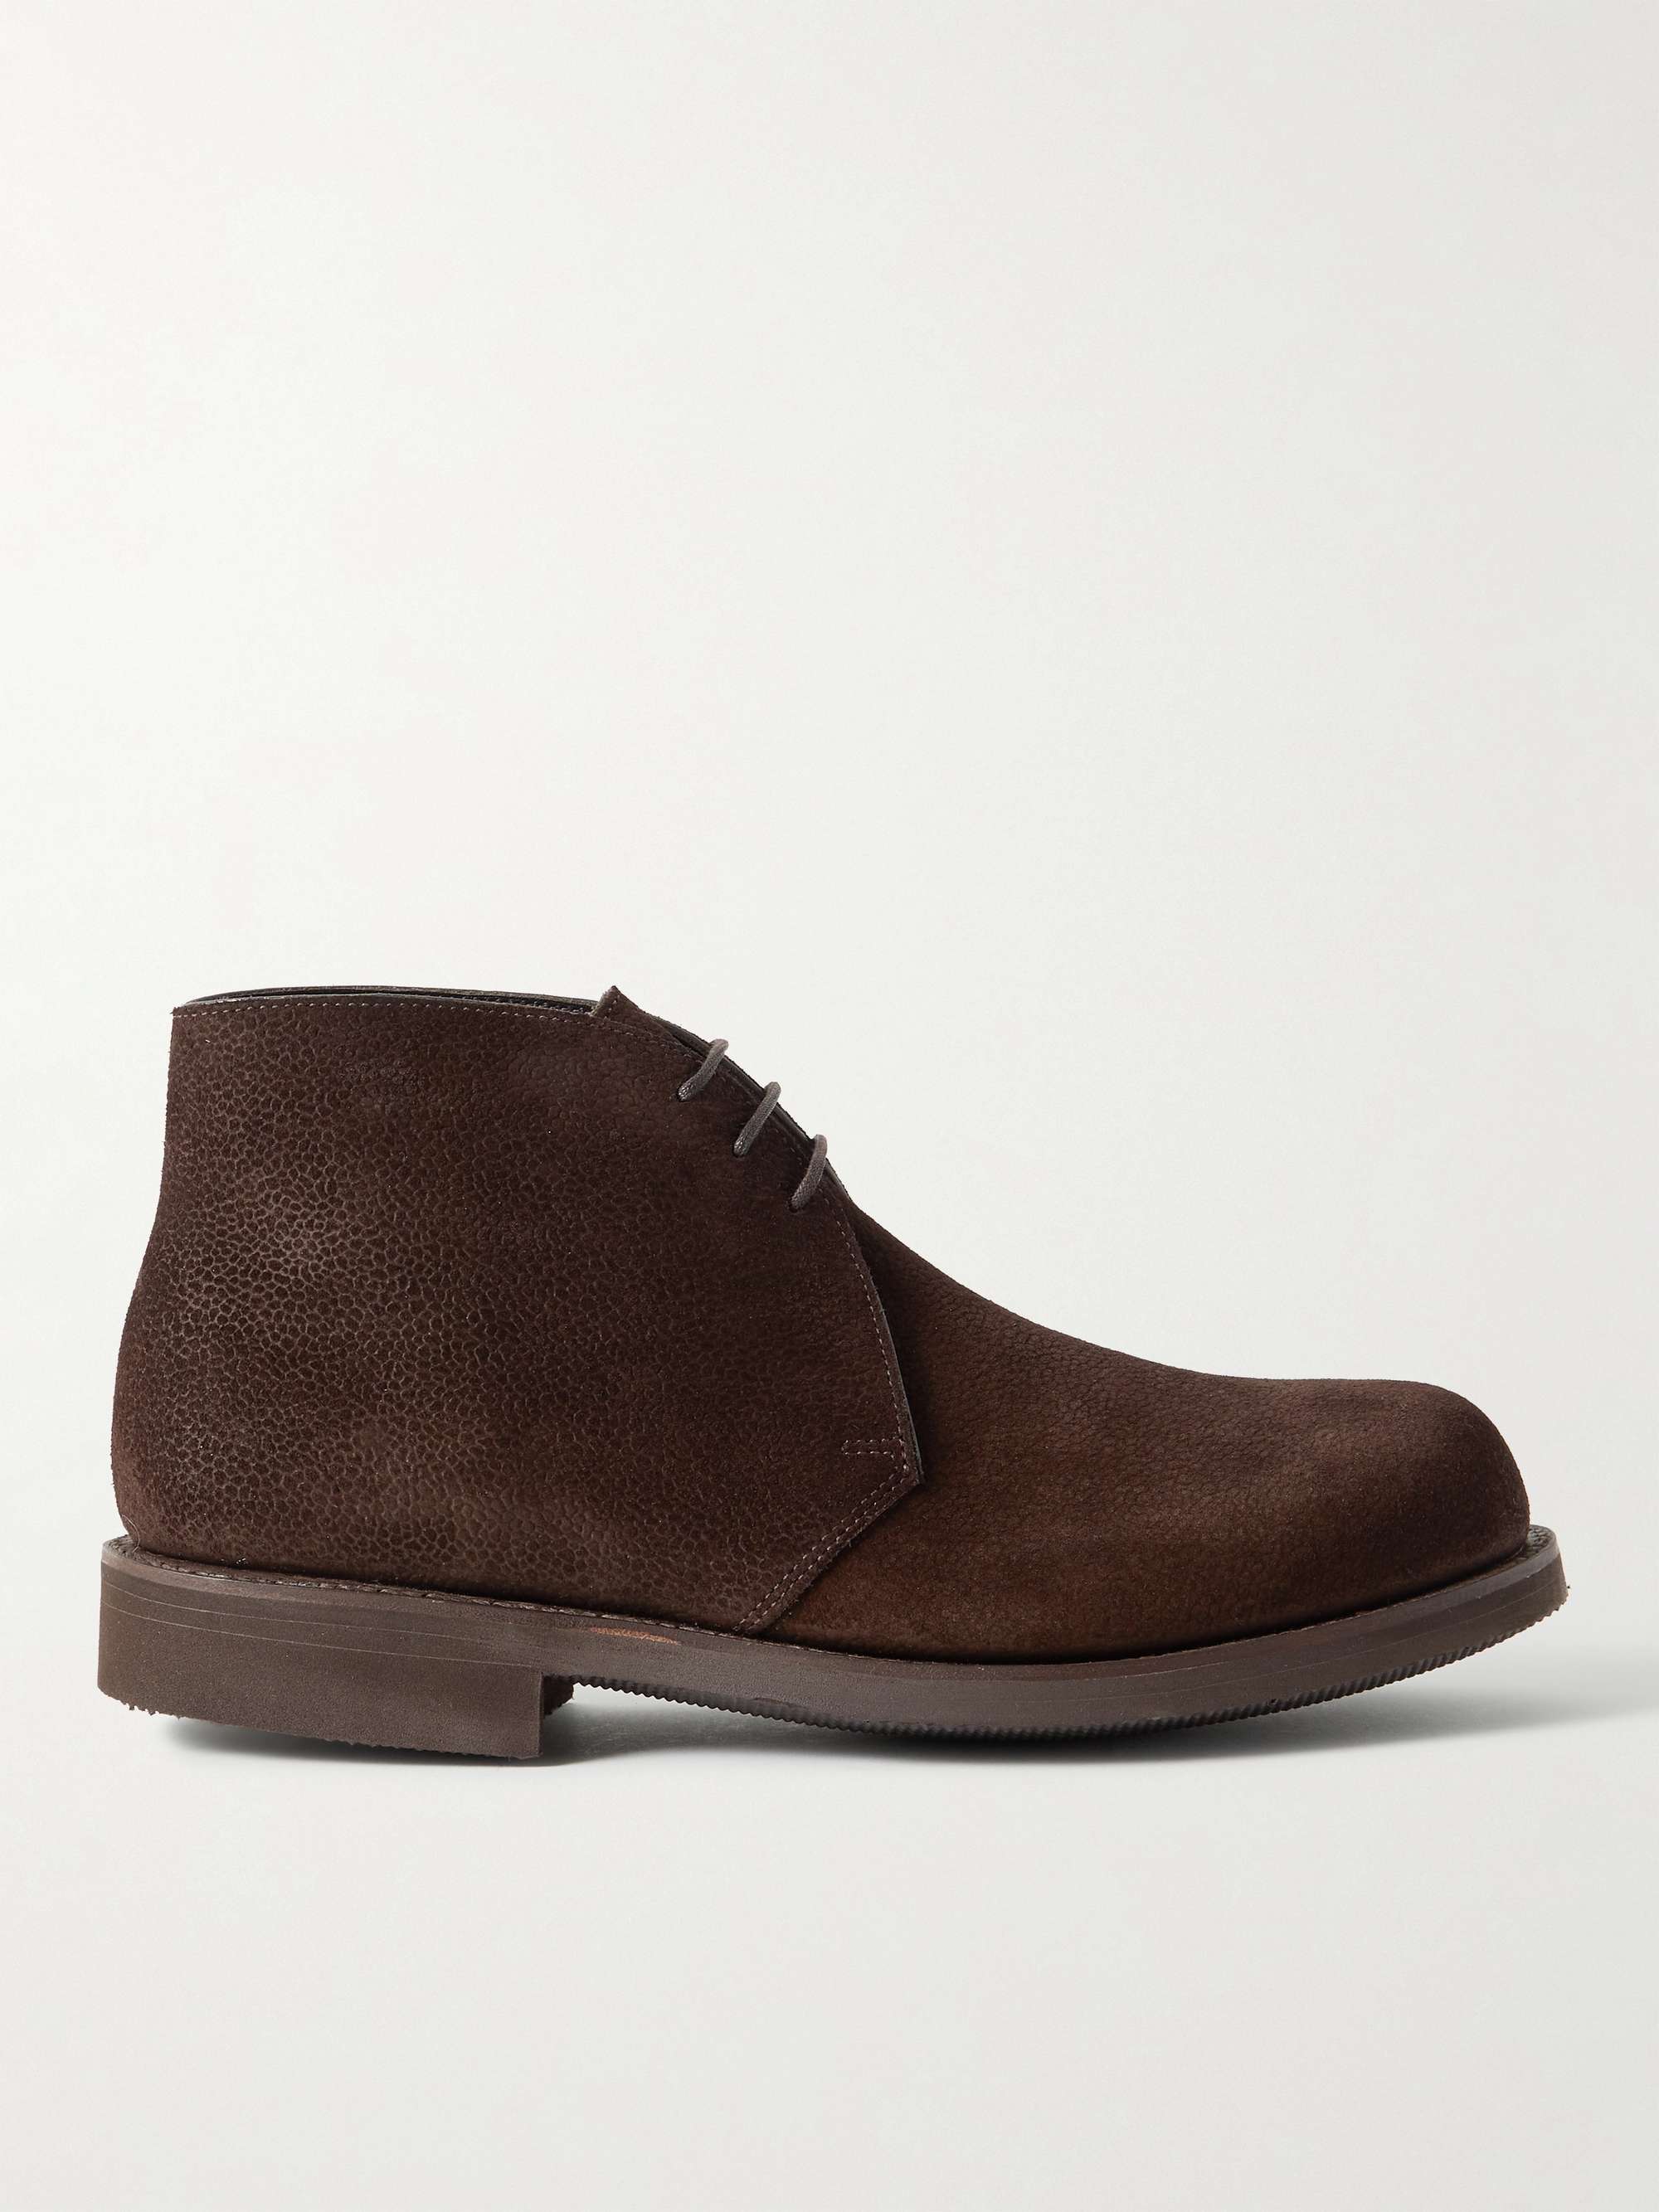 GEORGE CLEVERLEY Jacob Full-Grain Suede Chukka Boots